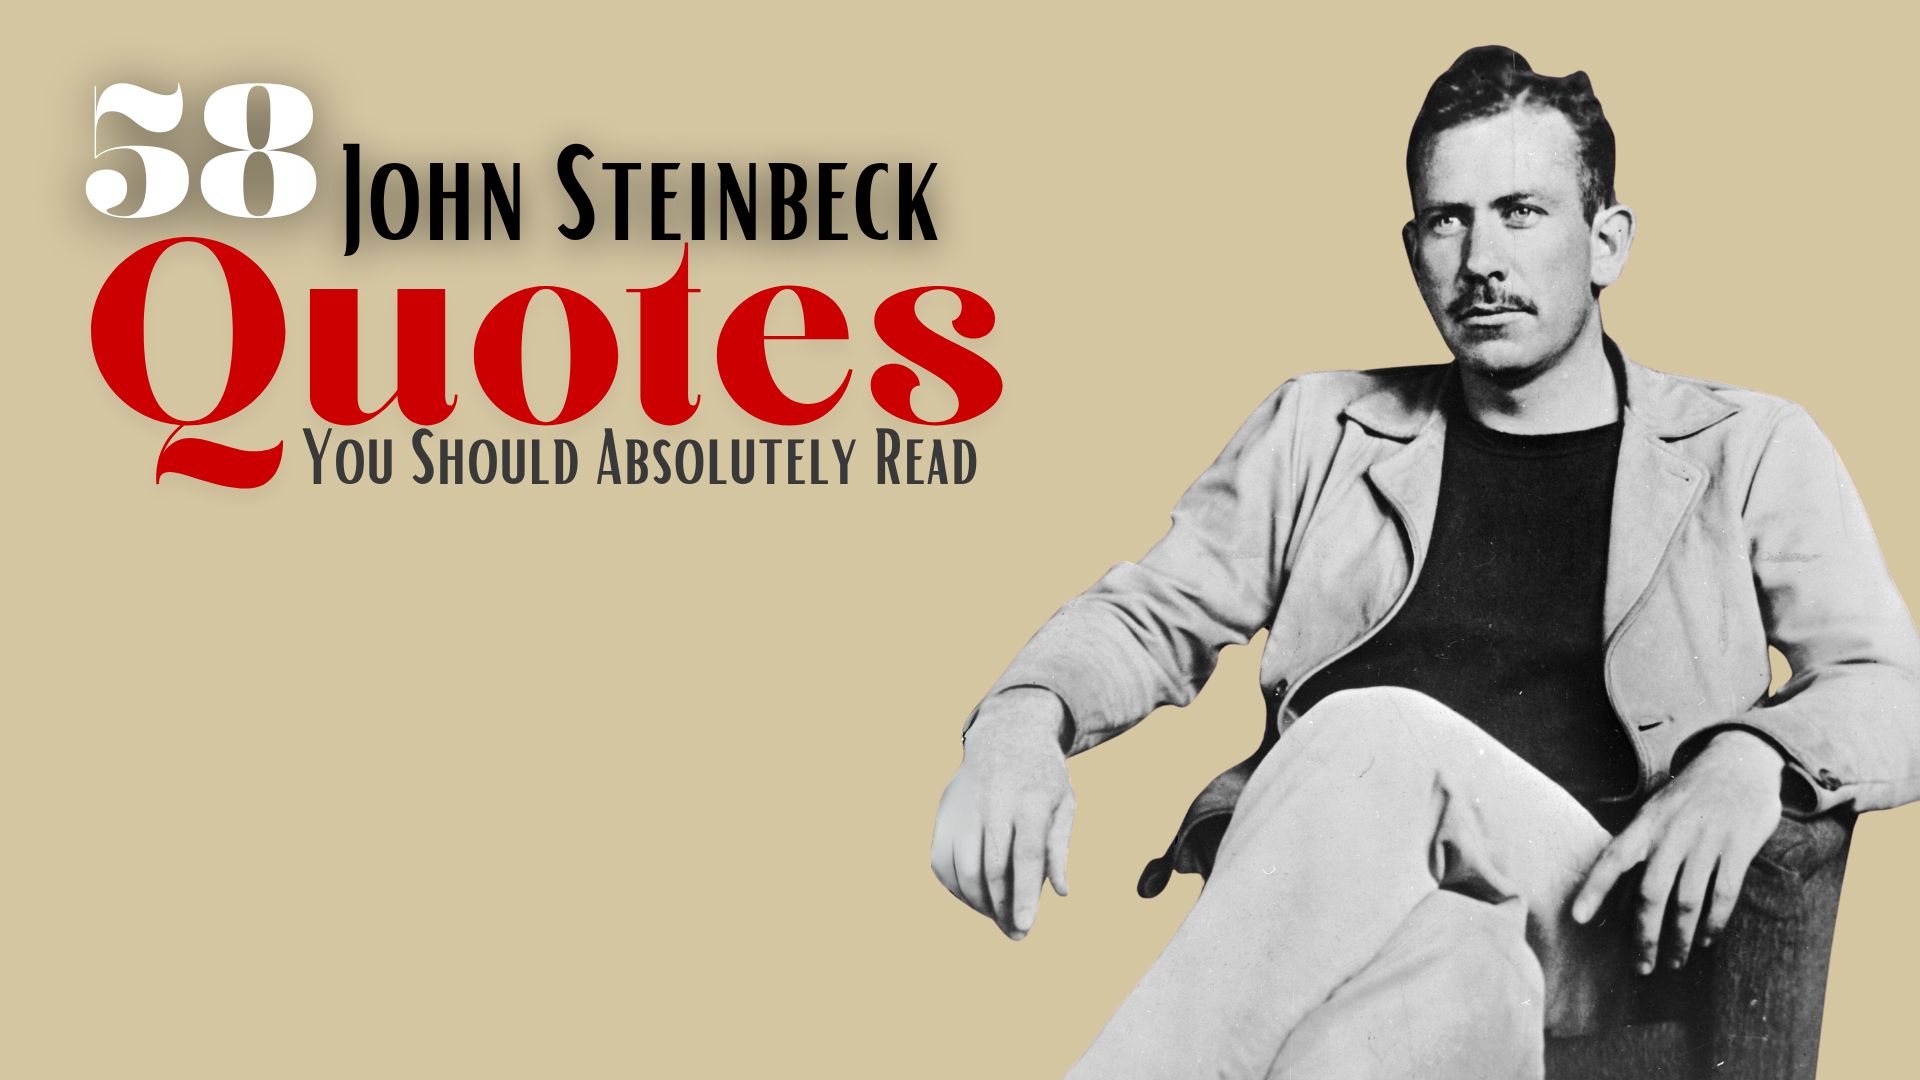 58 John Steinbeck Quotes You Should Absolutely Read